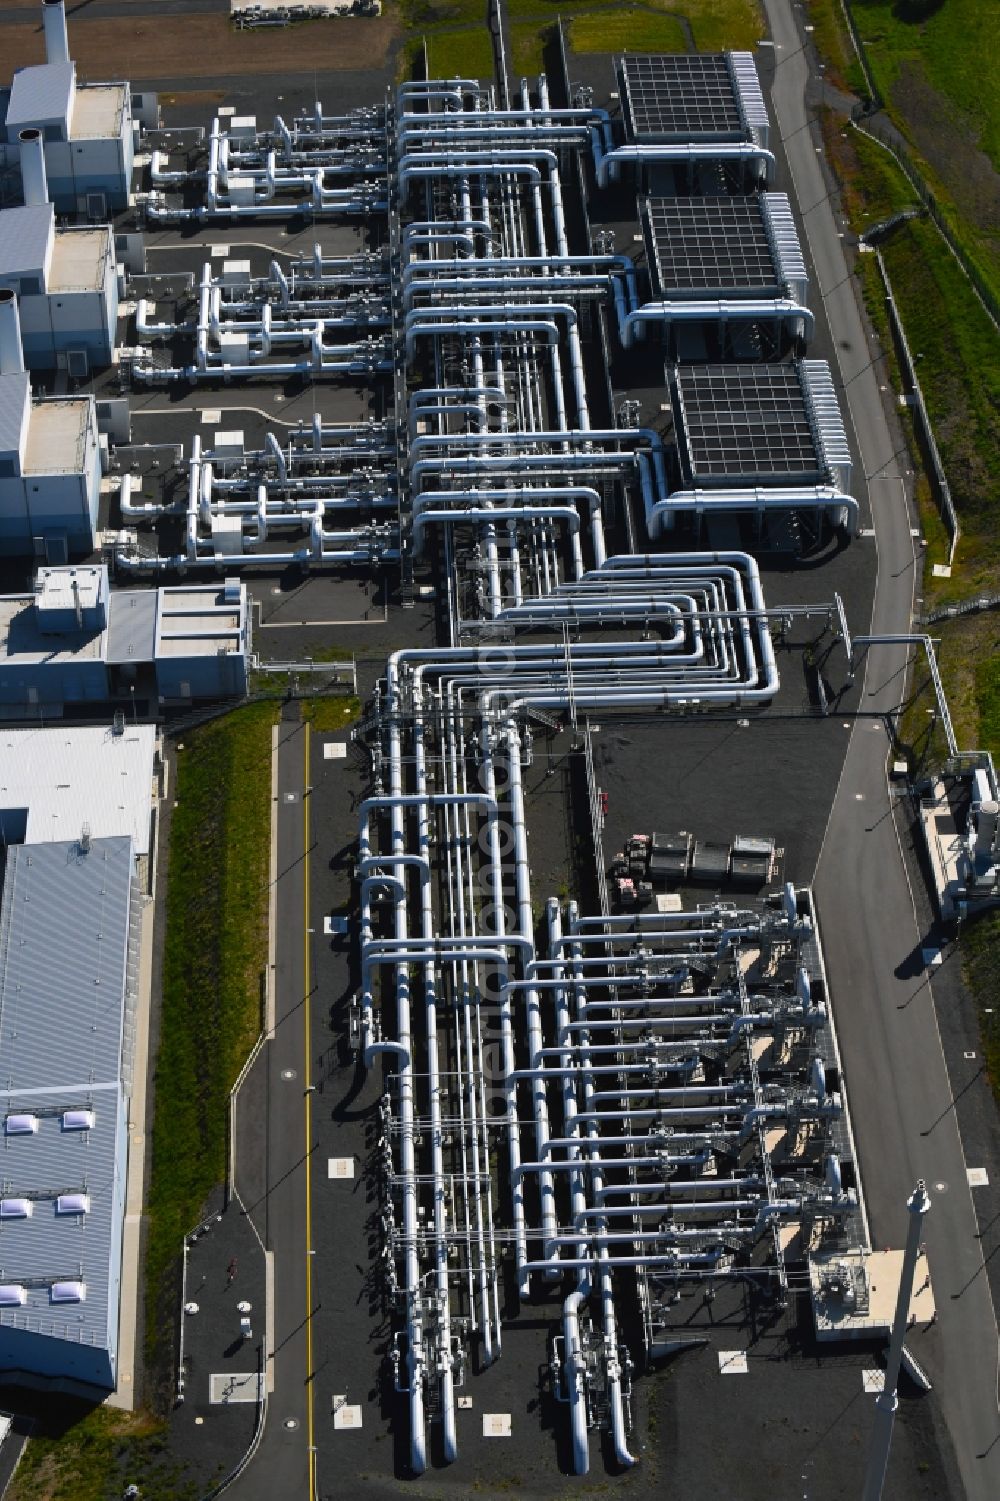 Herbstein from the bird's eye view: Compressor Stadium and pumping station for natural gas of Open Grid Europe GmbH (OGE) in the district Rixfeld in Herbstein in the state Hesse, Germany